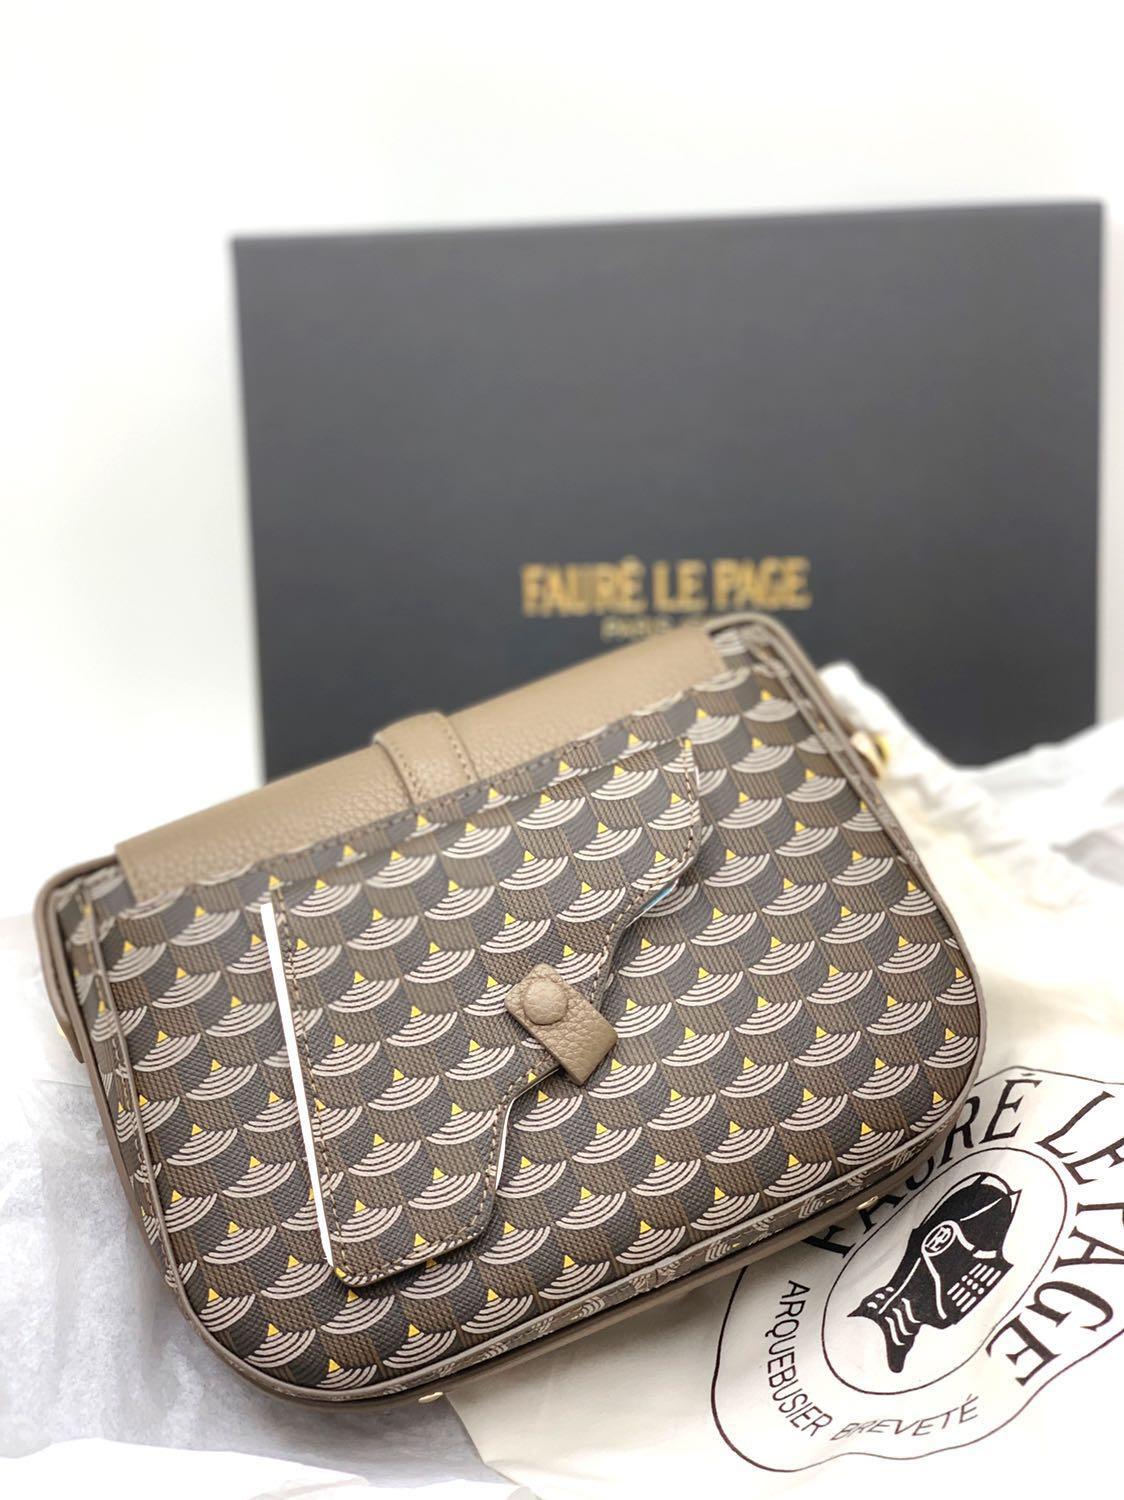 🔥🔥 BNIB New Collection Faure Le Page Cartouchiere 21 Black, Luxury, Bags  & Wallets on Carousell